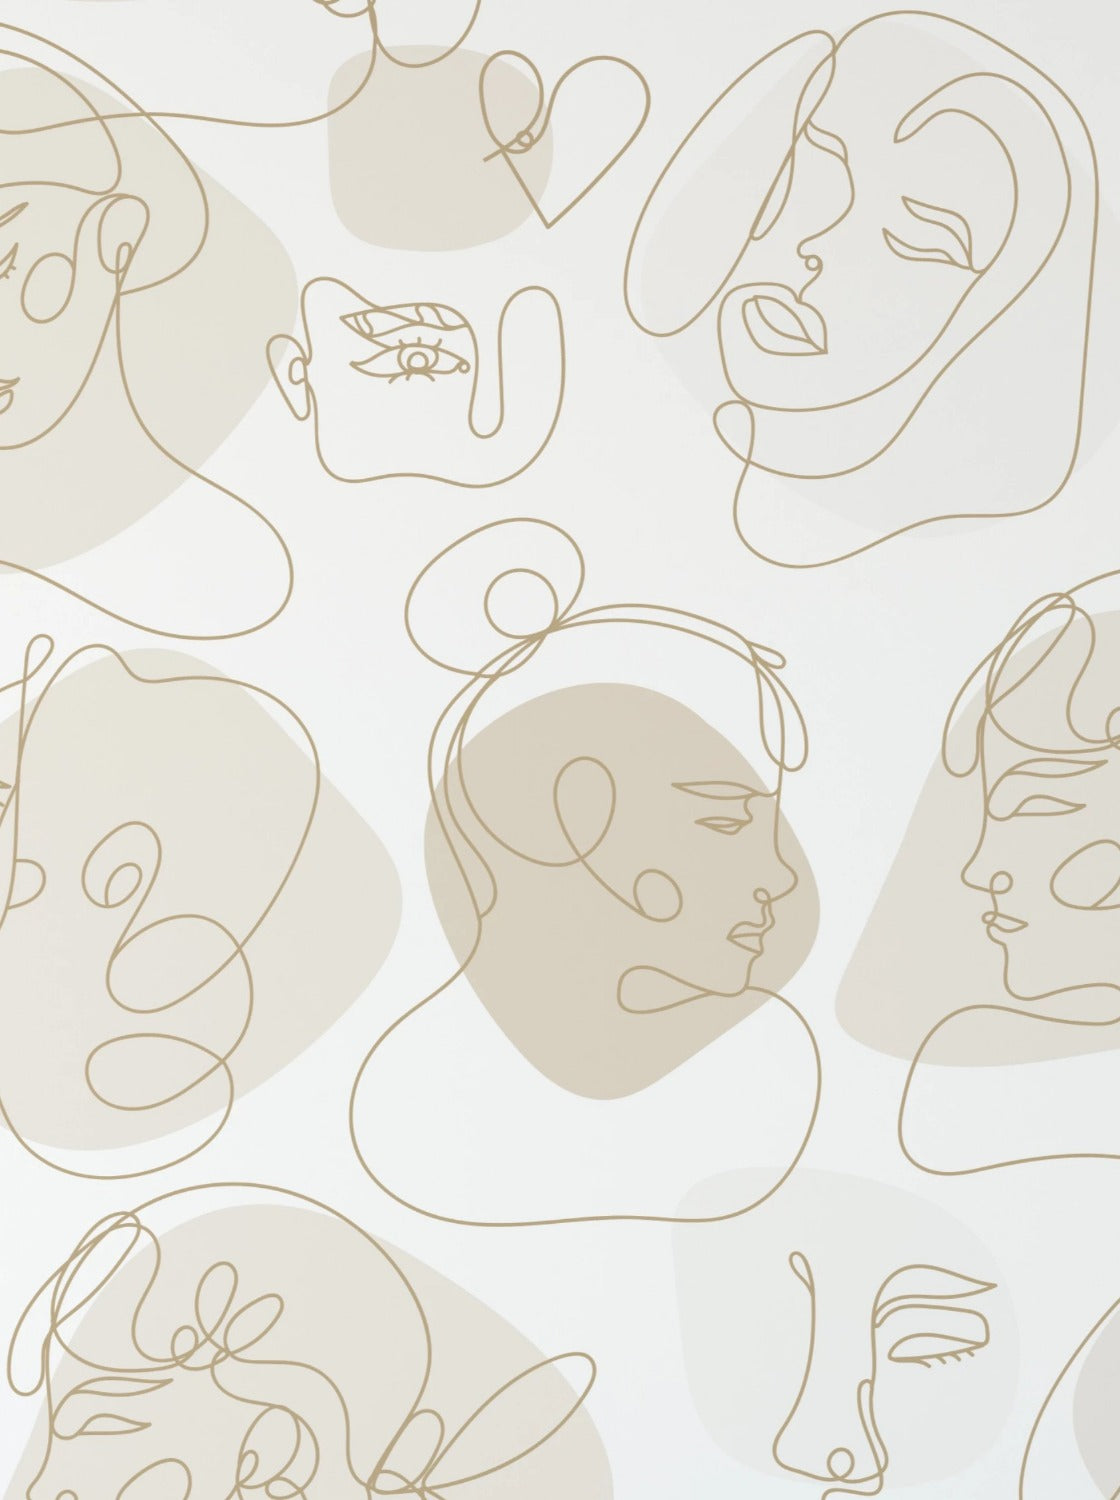 A close-up view of the wallpaper roll with golden line drawings of abstract faces on a white backdrop. The roll is partially unrolled, displaying the elegant and flowing artwork that covers the paper.